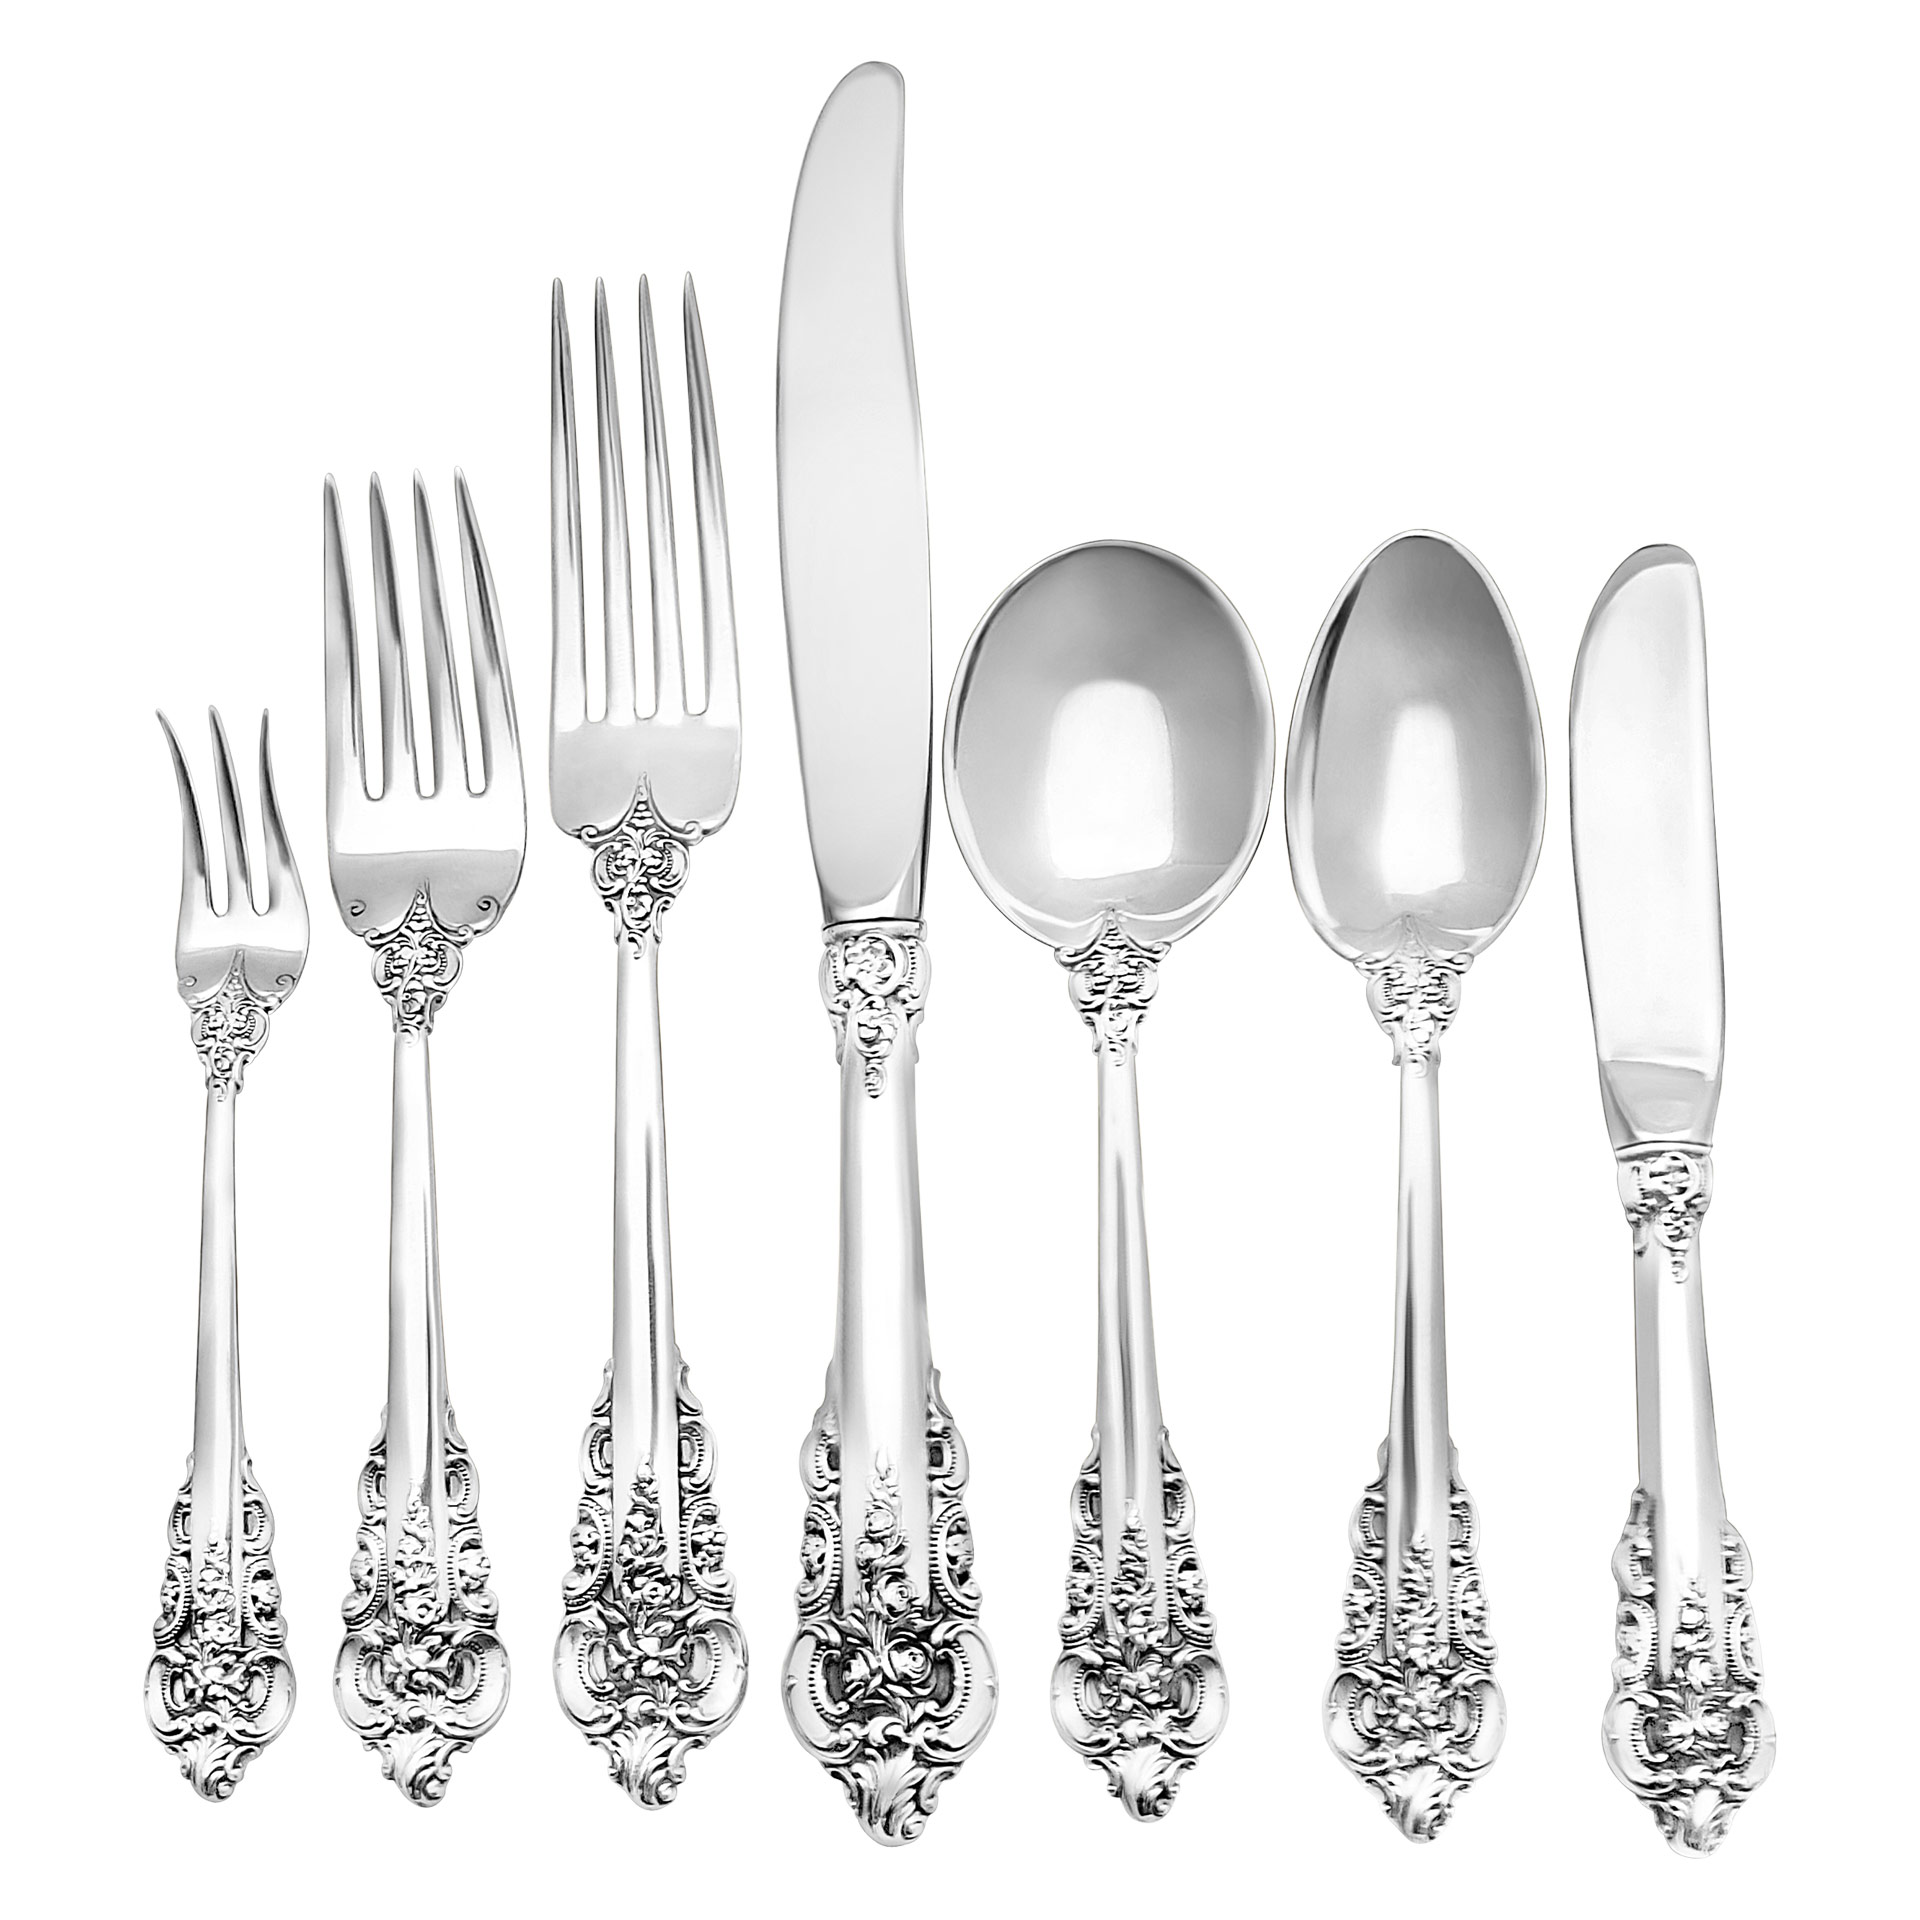 "GRANDE BAROQUE" Sterling Silver Flatware Set. Ptd 1941 by Wallace. 7 place setting for 12 with 8 serving pieces. Over 3500 grams sterling silver.